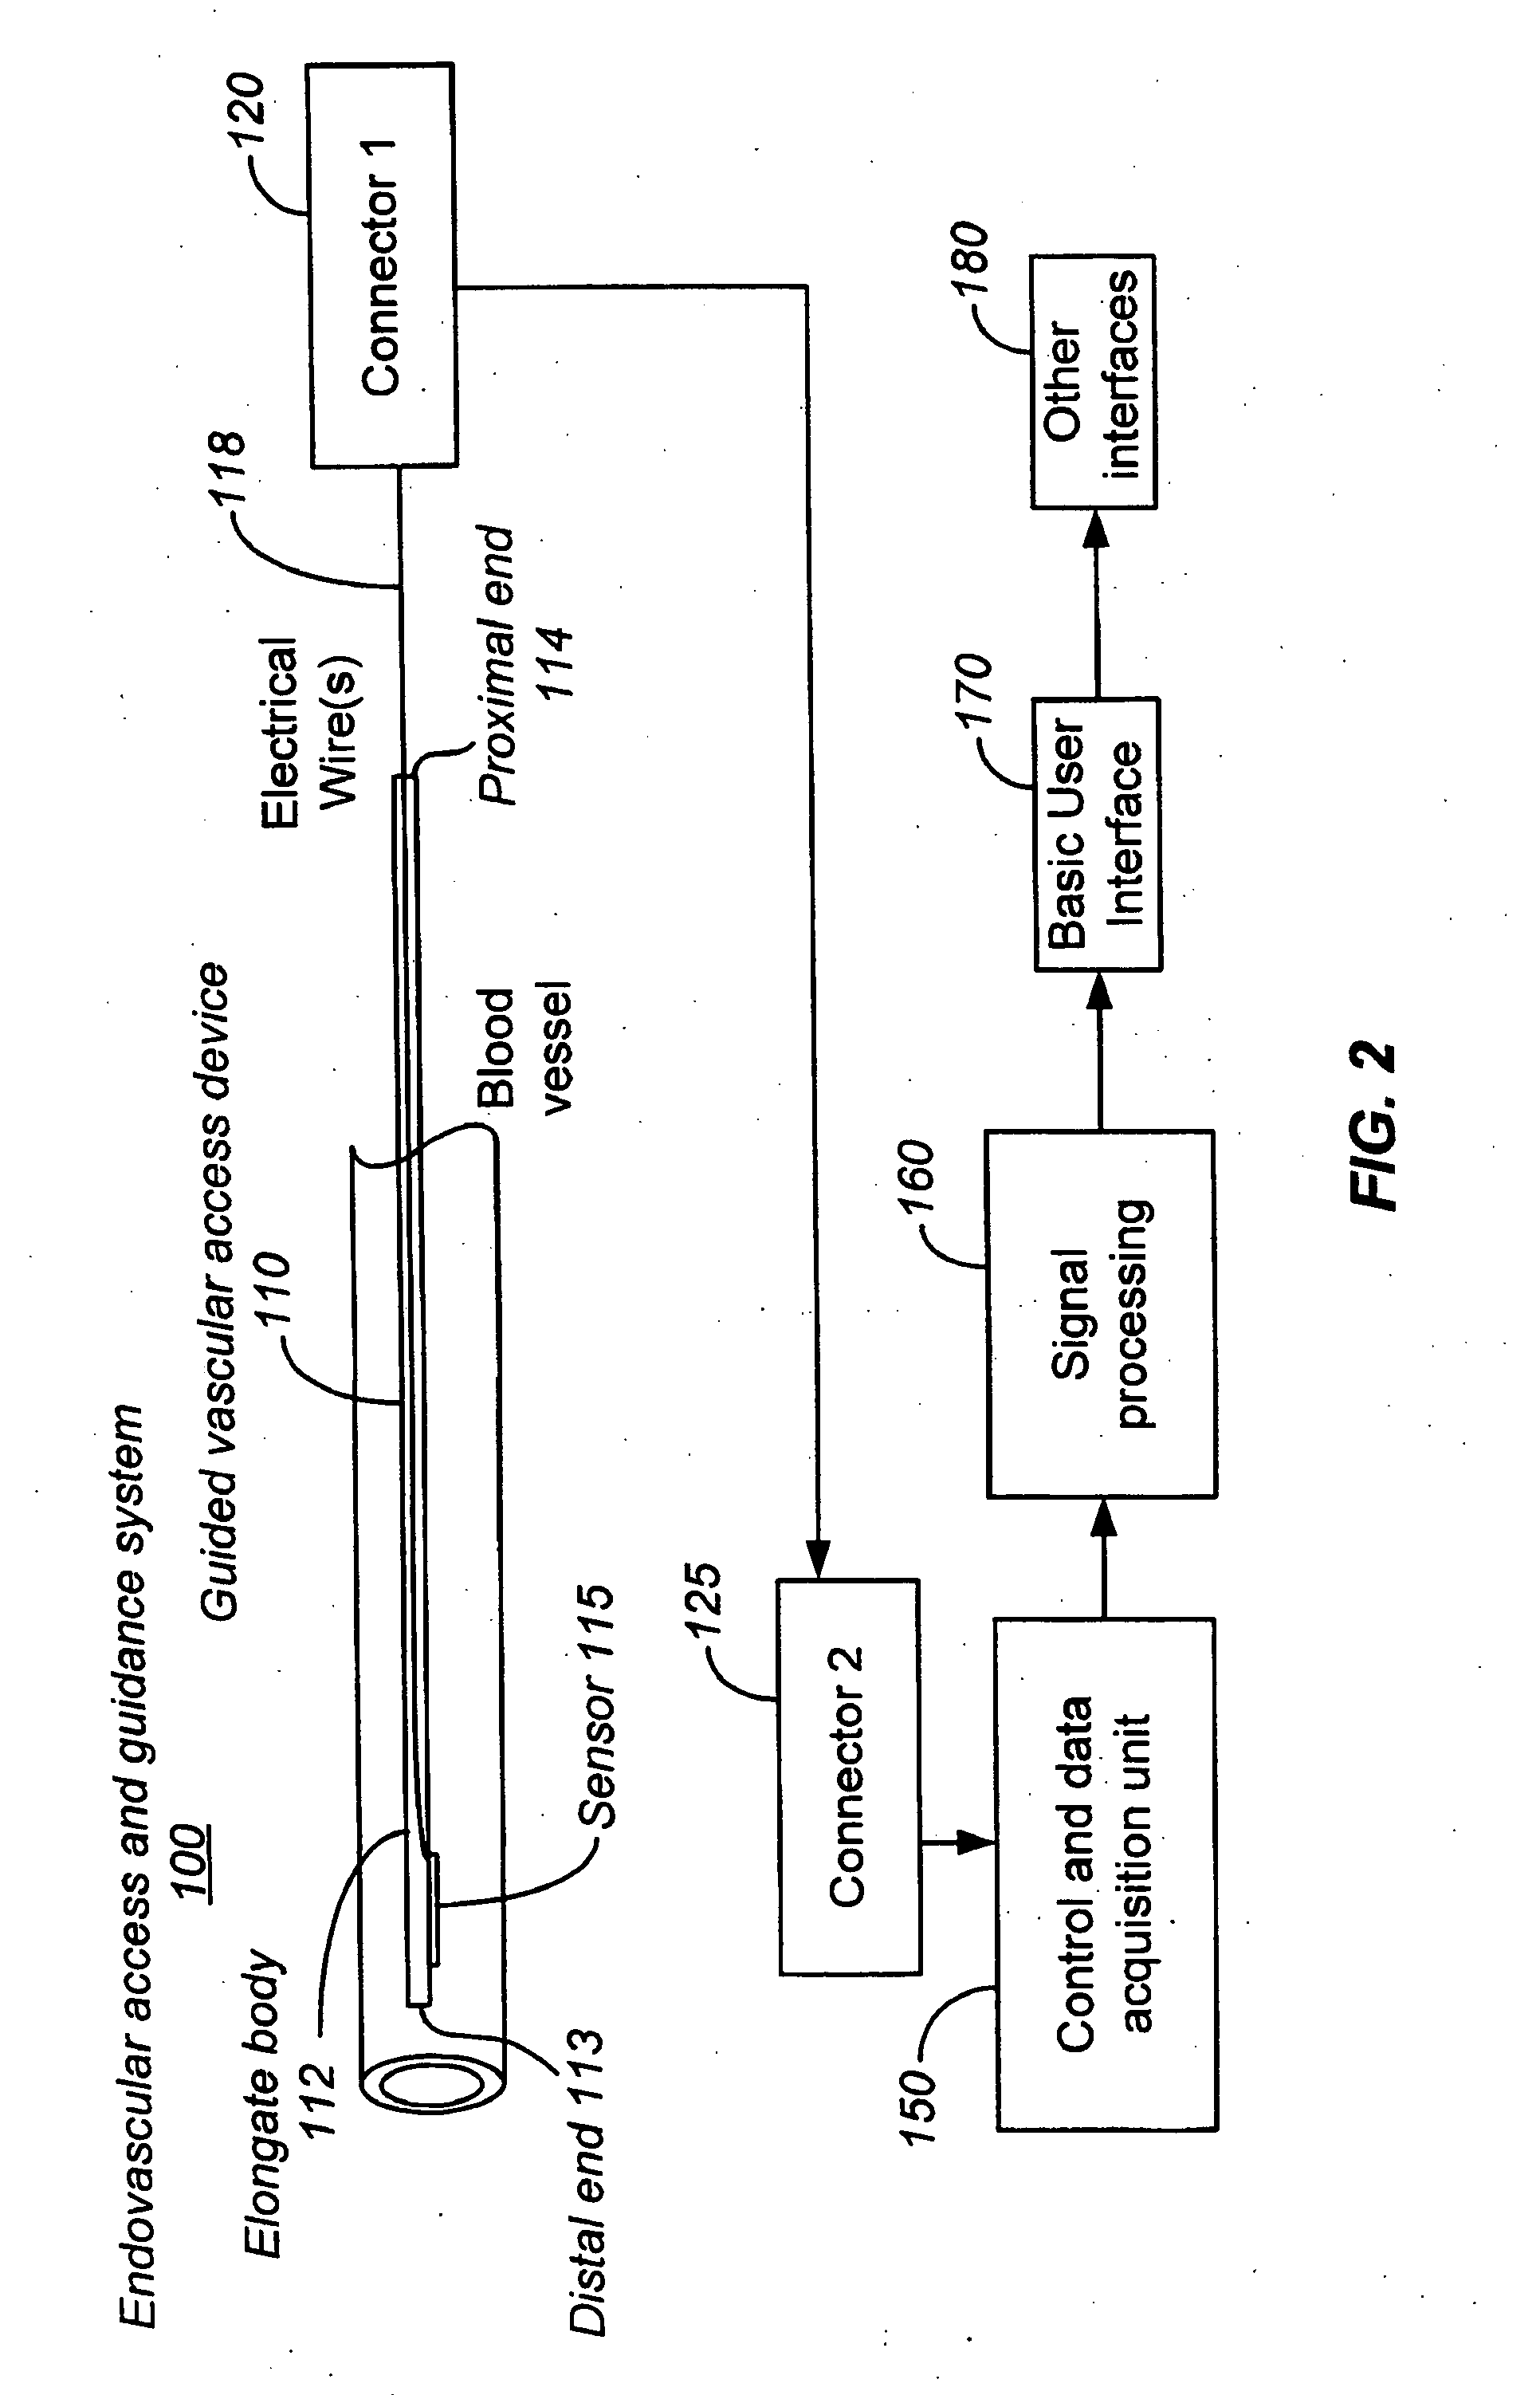 Ultrasound methods of positioning guided vascular access devices in the venous system